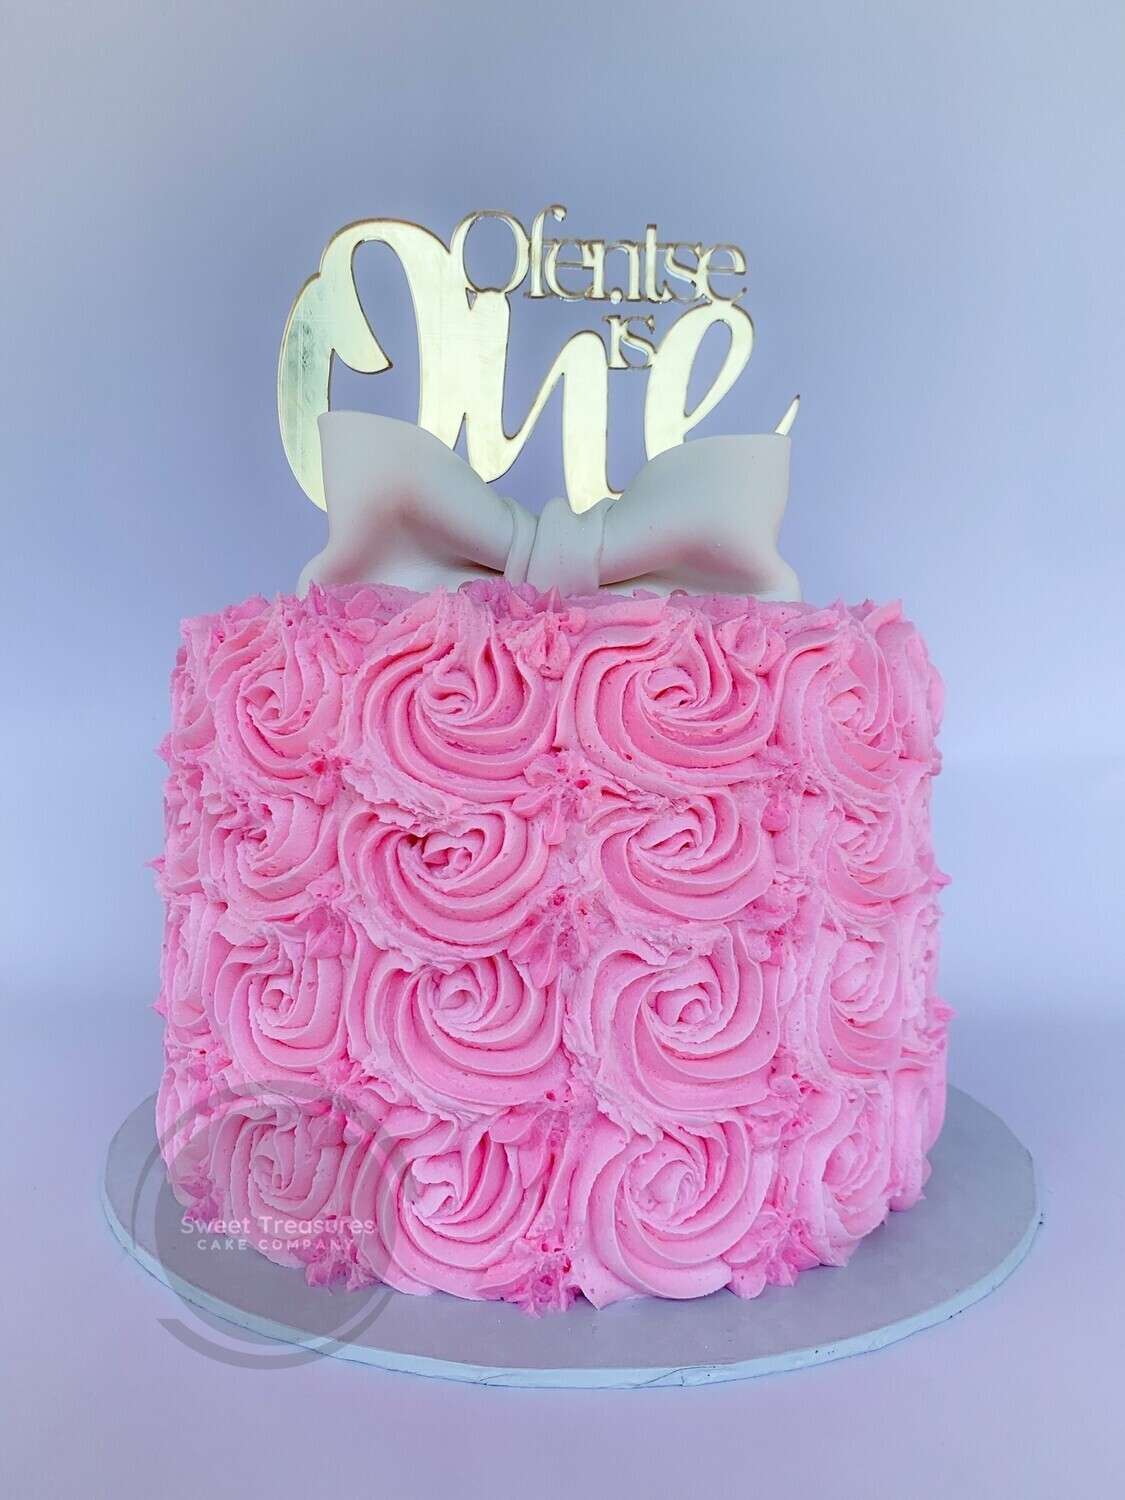 Single tier Buttercream Rosettes Smash Cake, Size: 7 inches (18cm wide): 3 layers tall (12cm), 2 layers of filling: up to 12 Servings, Upsize (Add Layer to make taller and serve more guests);: No thank you